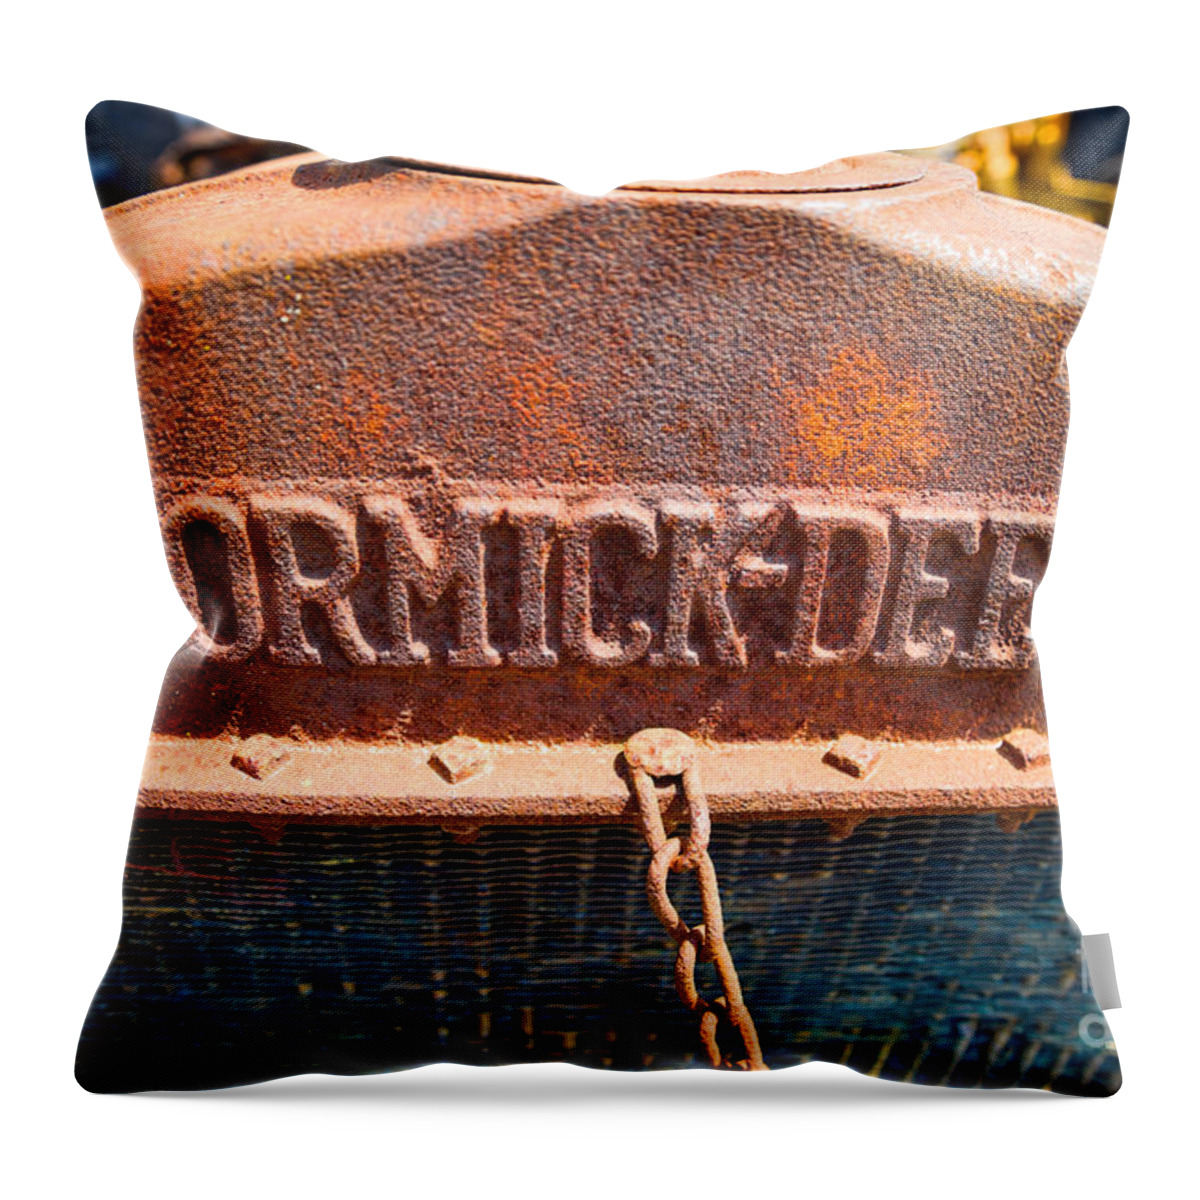 Old Throw Pillow featuring the photograph Old tractor grille by Les Palenik